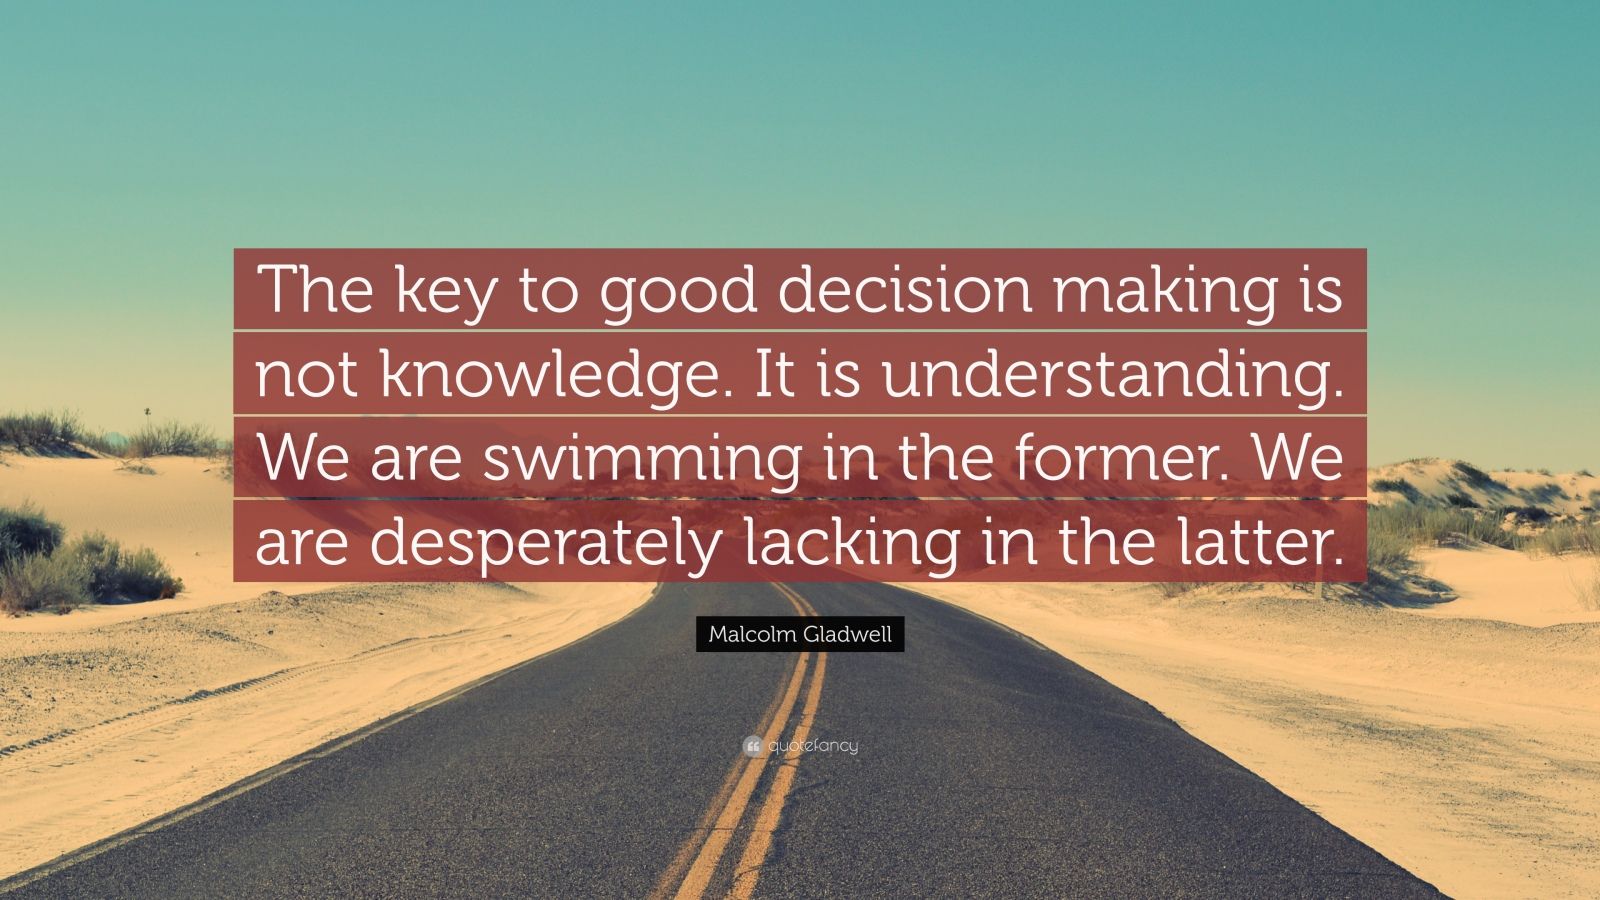 Malcolm Gladwell Quote: “The key to good decision making is not